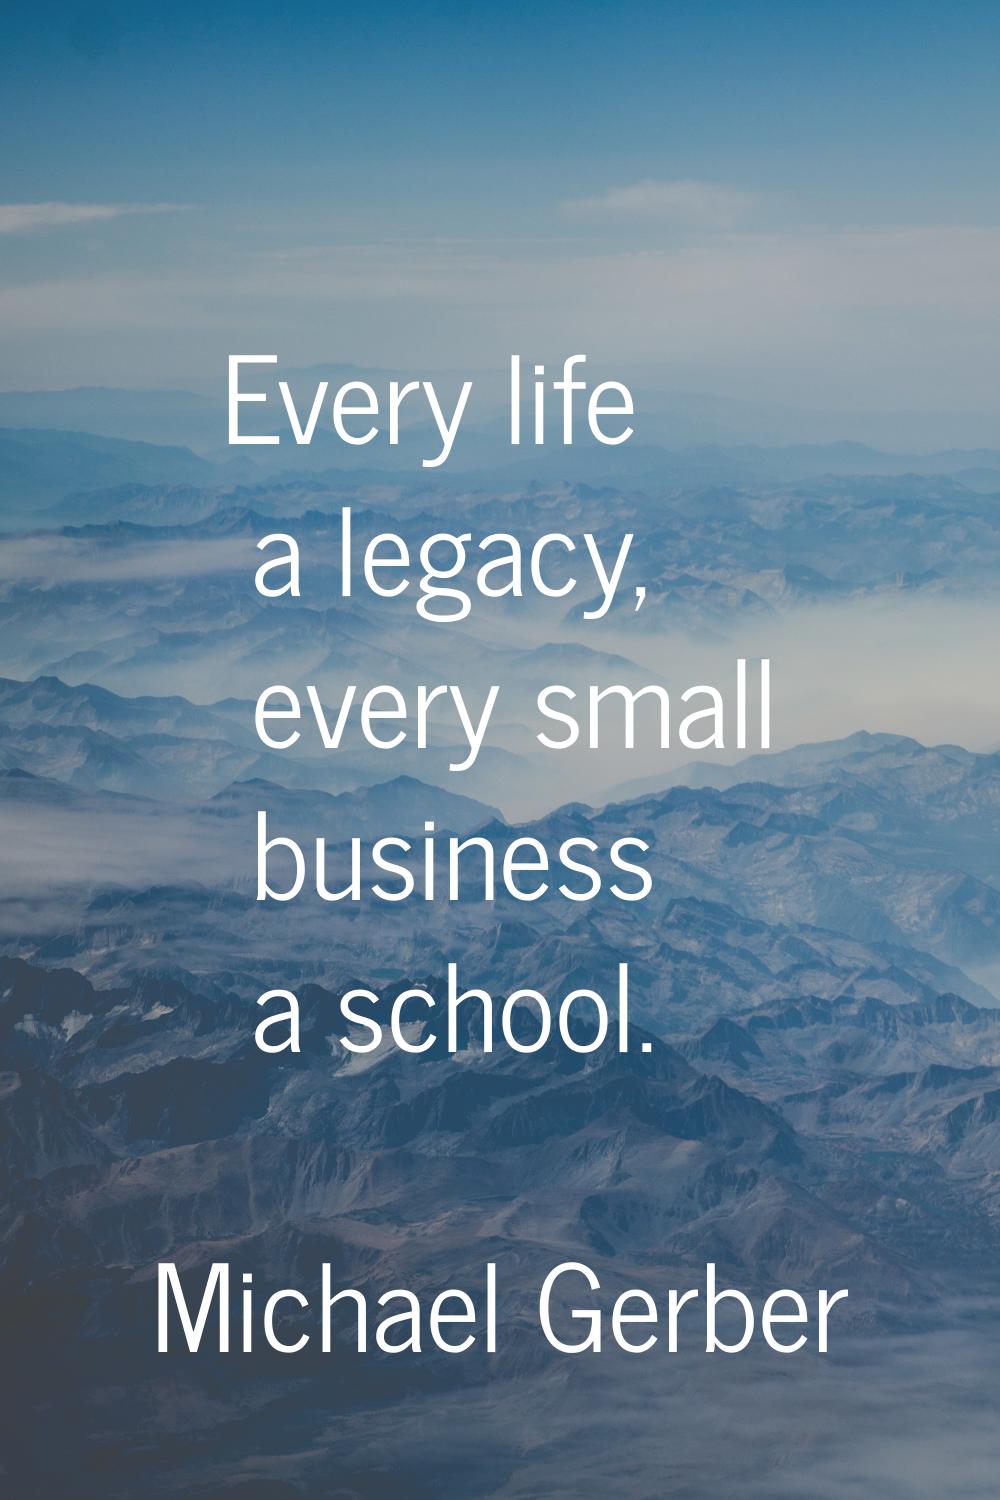 Every life a legacy, every small business a school.